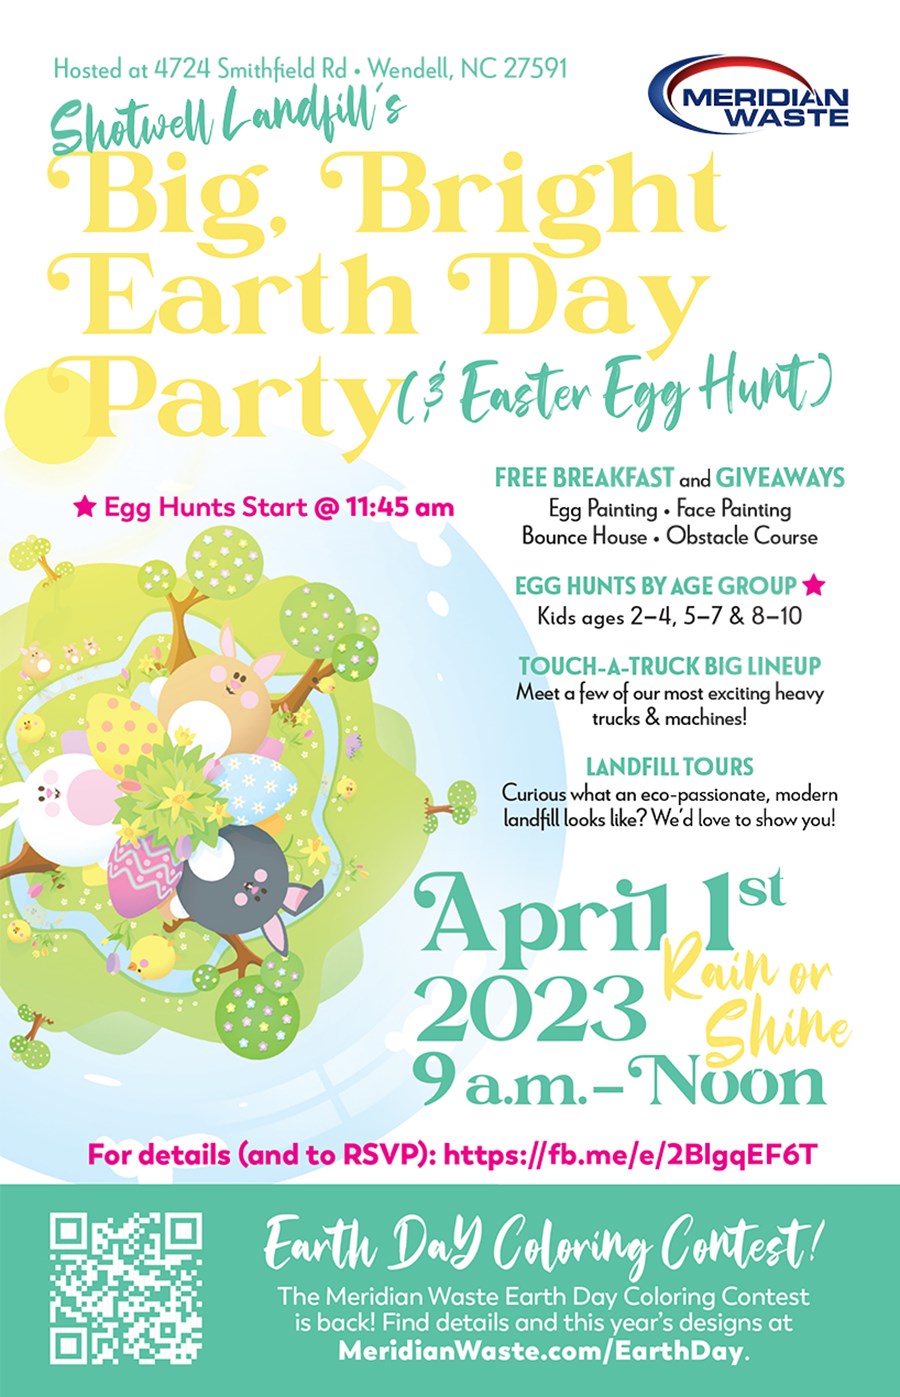 Meridian Waste Celebrates Earth Day and the Easter season on April 1